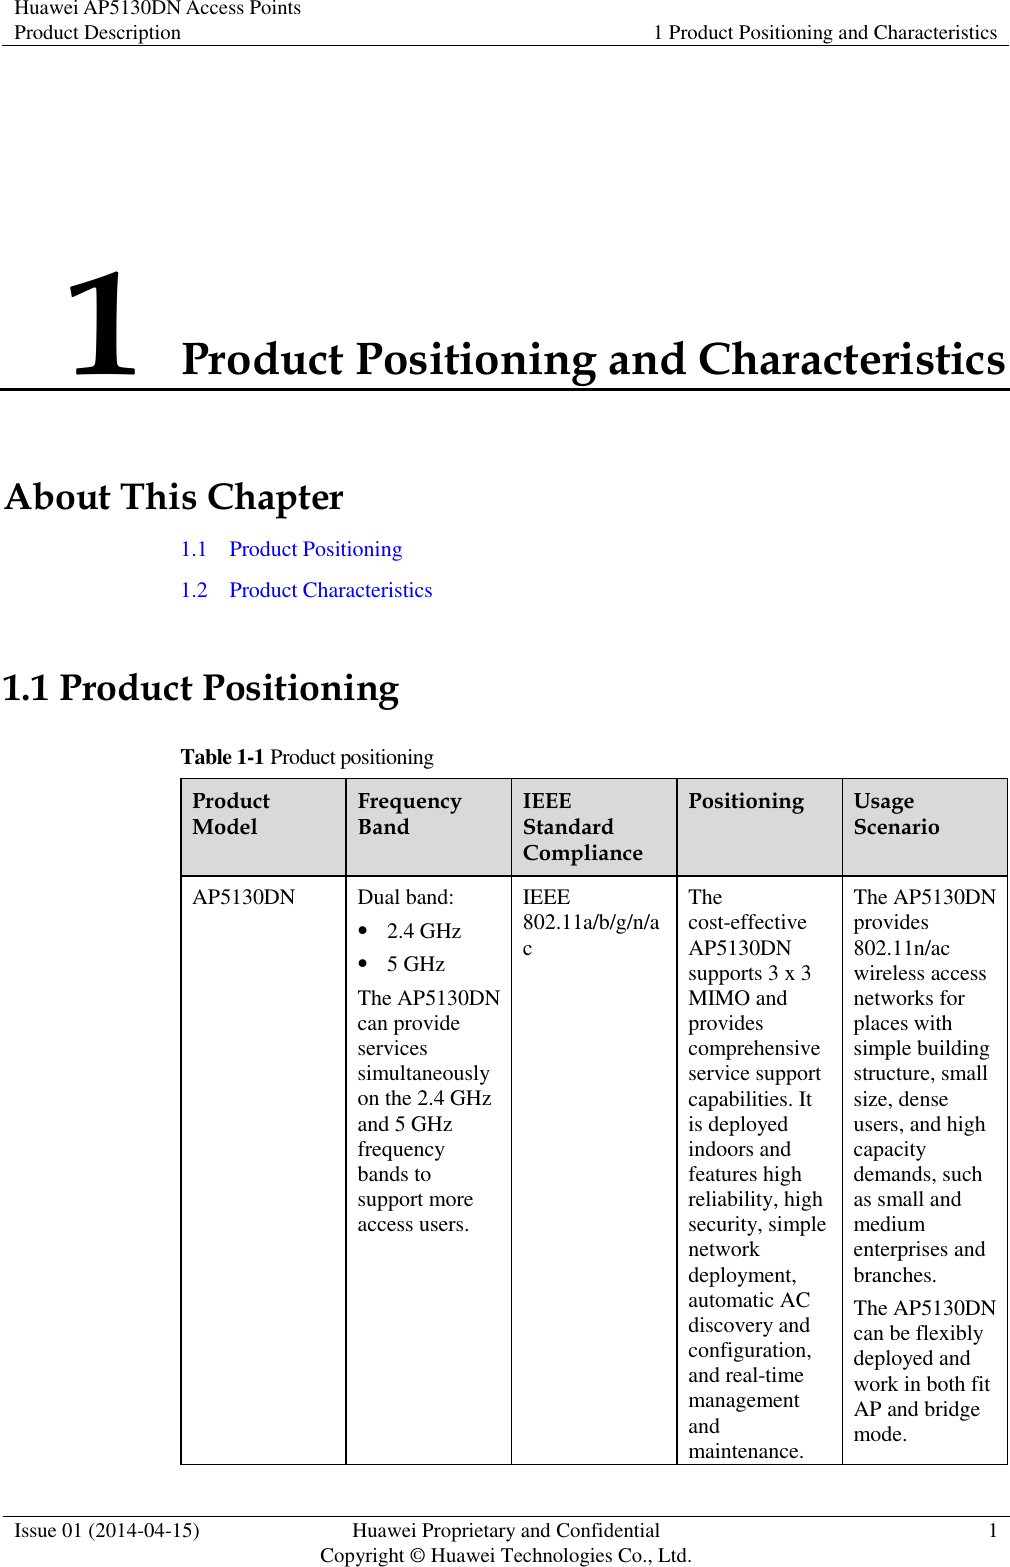 Huawei AP5130DN Access Points Product Description 1 Product Positioning and Characteristics  Issue 01 (2014-04-15) Huawei Proprietary and Confidential                                     Copyright © Huawei Technologies Co., Ltd. 1  1 Product Positioning and Characteristics About This Chapter 1.1    Product Positioning 1.2    Product Characteristics 1.1 Product Positioning Table 1-1 Product positioning Product Model Frequency Band IEEE Standard Compliance Positioning Usage Scenario AP5130DN Dual band:  2.4 GHz  5 GHz The AP5130DN can provide services simultaneously on the 2.4 GHz and 5 GHz frequency bands to support more access users. IEEE 802.11a/b/g/n/ac The cost-effective AP5130DN supports 3 x 3 MIMO and provides comprehensive service support capabilities. It is deployed indoors and features high reliability, high security, simple network deployment, automatic AC discovery and configuration, and real-time management and maintenance. The AP5130DN provides 802.11n/ac wireless access networks for places with simple building structure, small size, dense users, and high capacity demands, such as small and medium enterprises and branches. The AP5130DN can be flexibly deployed and work in both fit AP and bridge mode. 